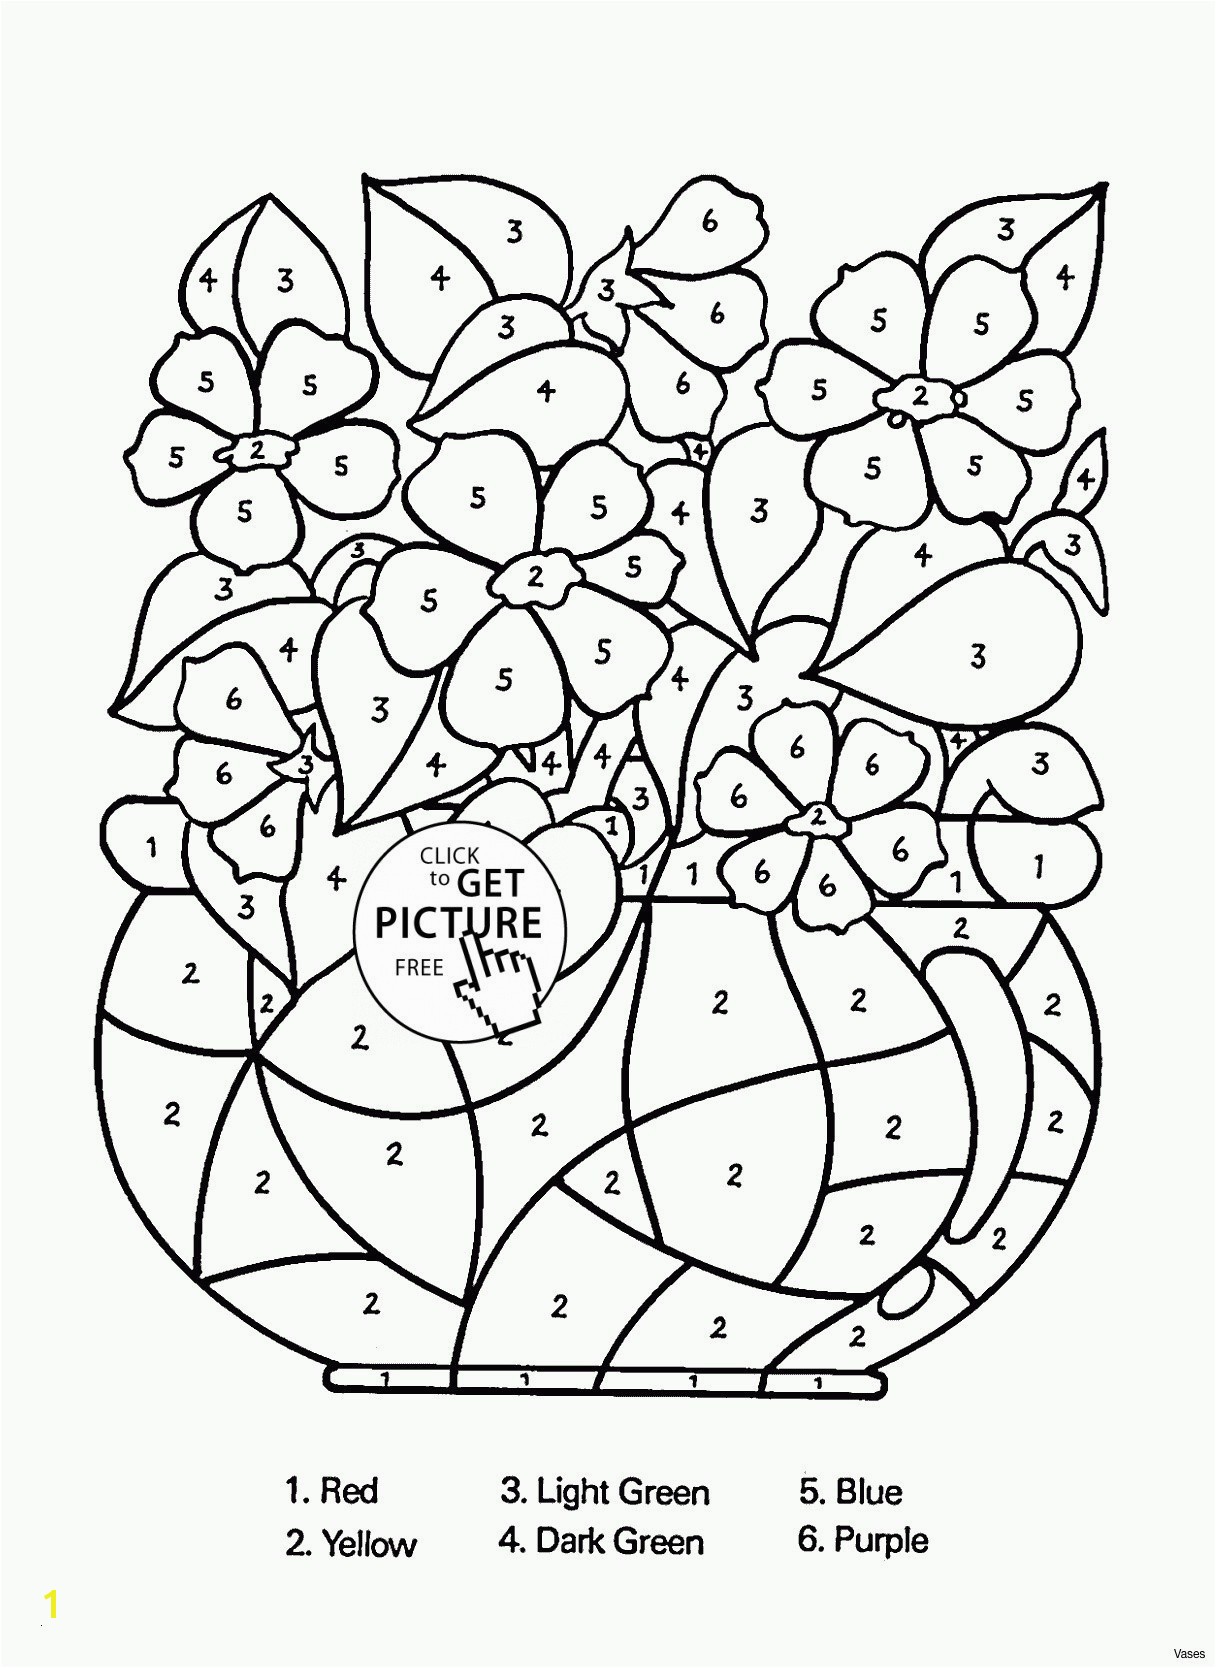 Free Coloring Pages Of Roses and Heart Fresh Coloring Pages Hearts with Flames Katesgrove